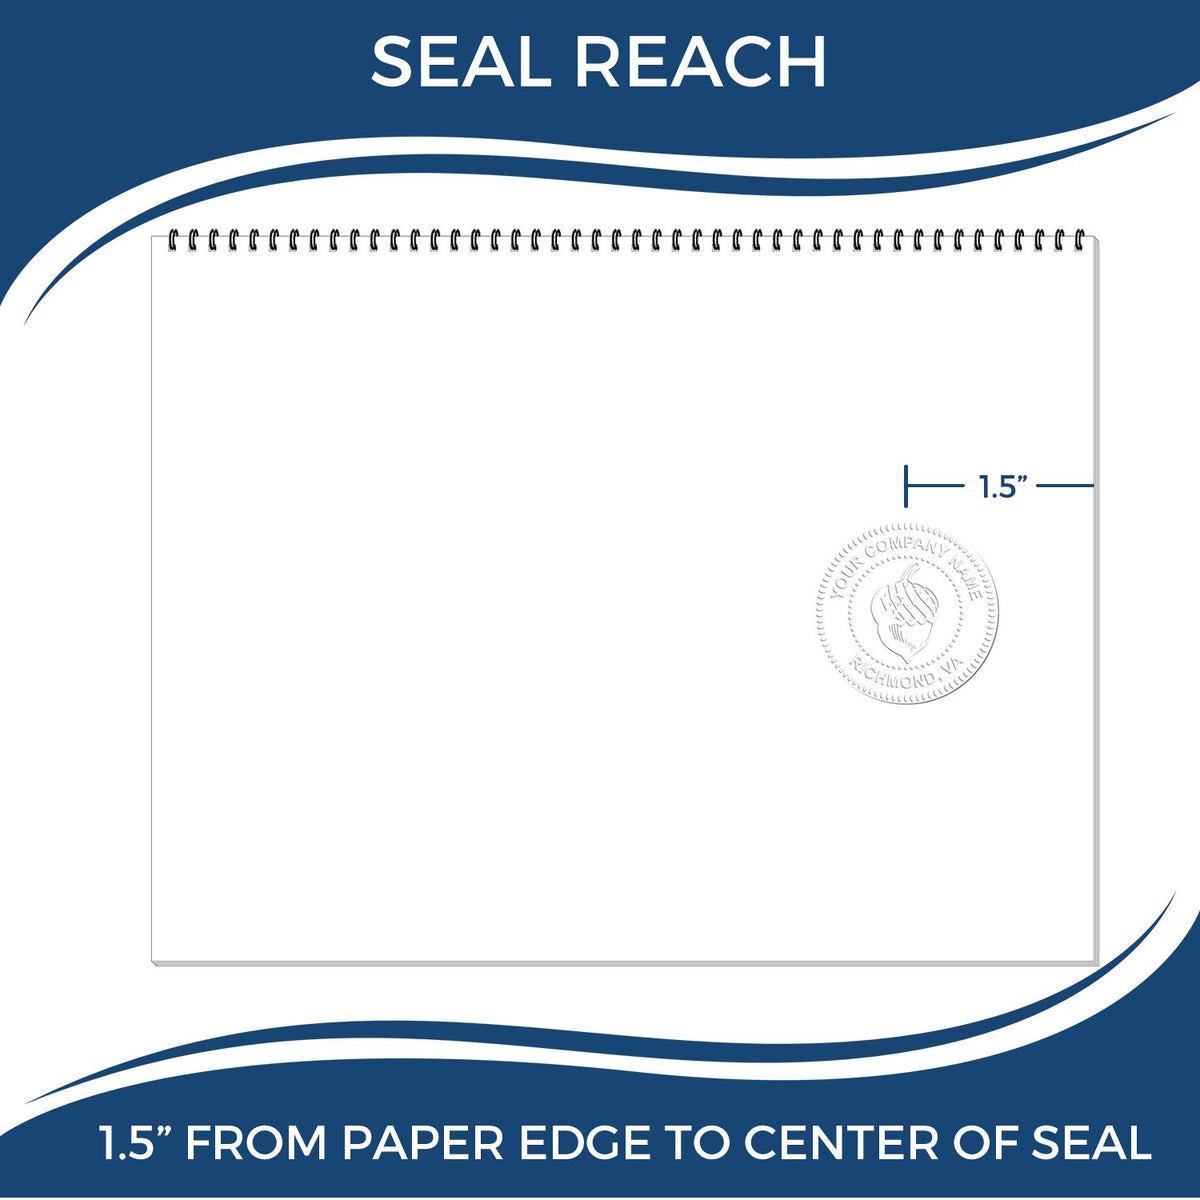 An infographic showing the seal reach which is represented by a ruler and a miniature seal image of the Gift Ohio Land Surveyor Seal